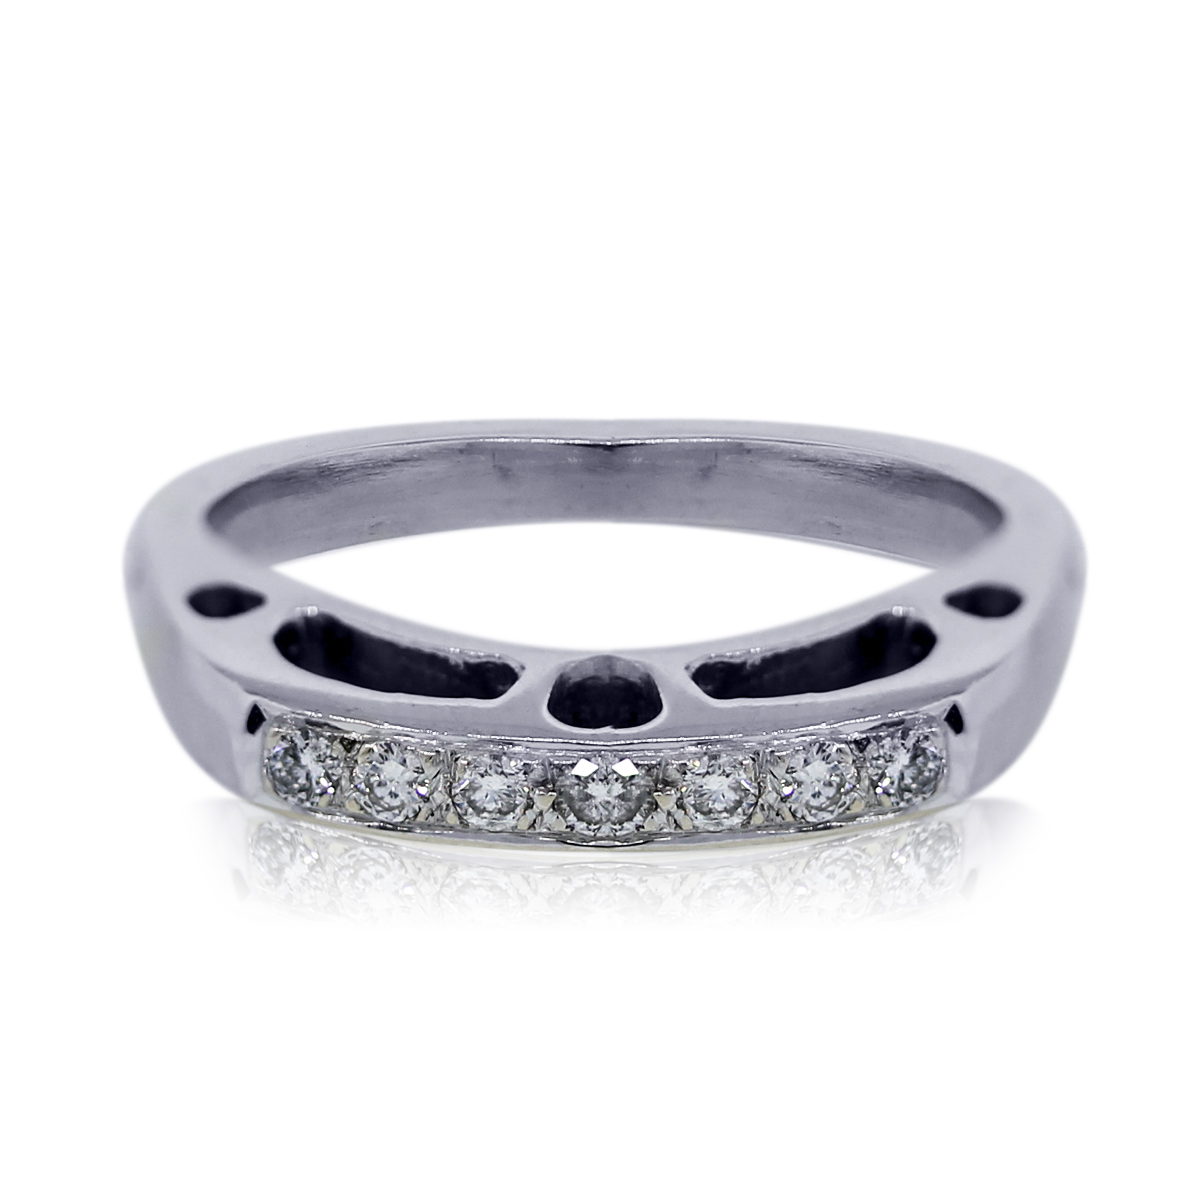 You are Viewing this White Gold Stackable Ring!